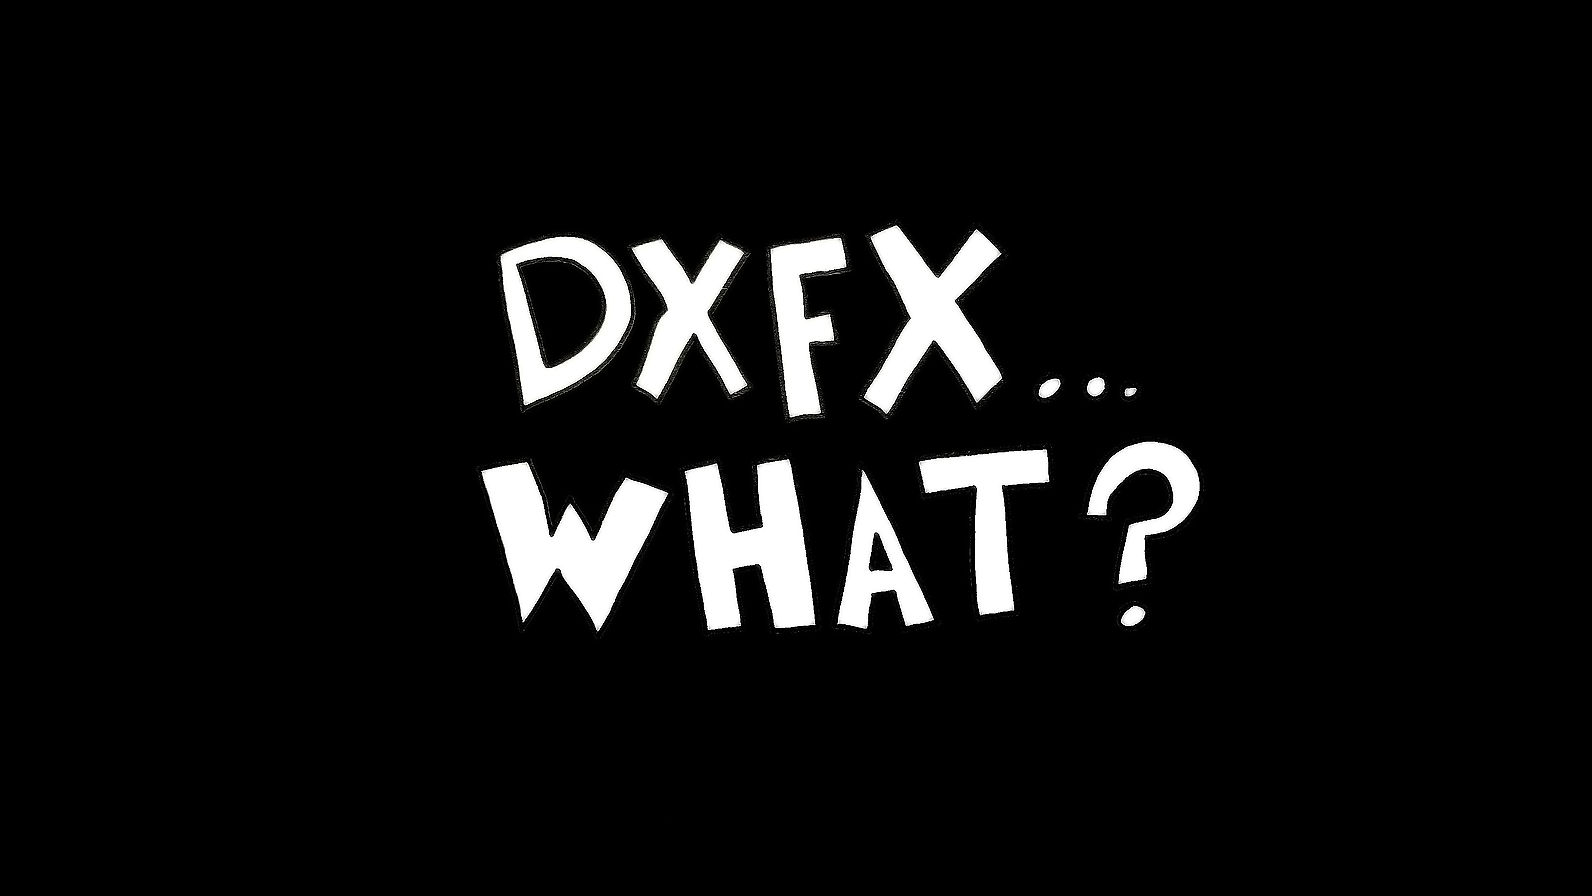 DXFX... WHAT?